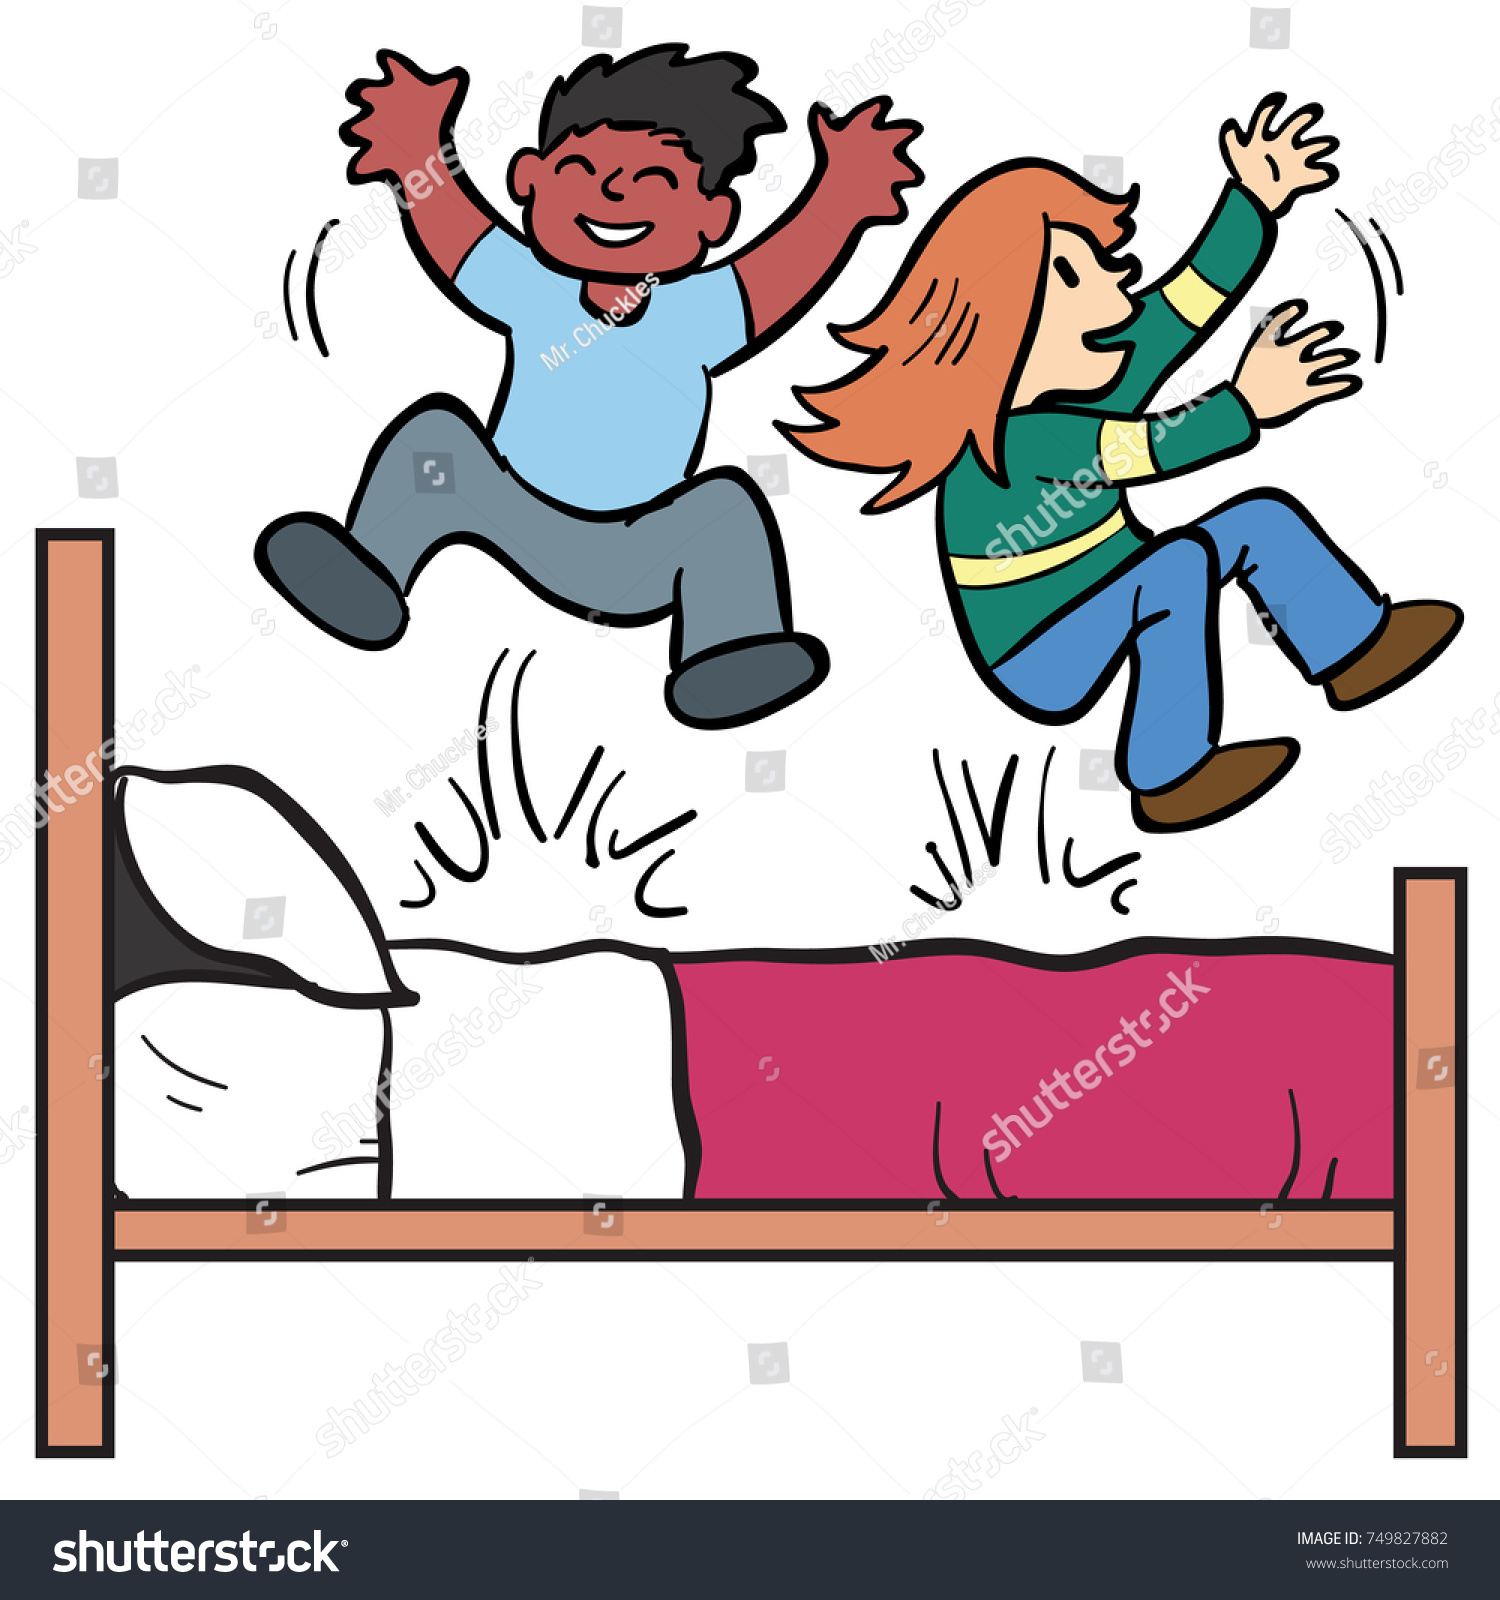 The fartjumping on the Bed